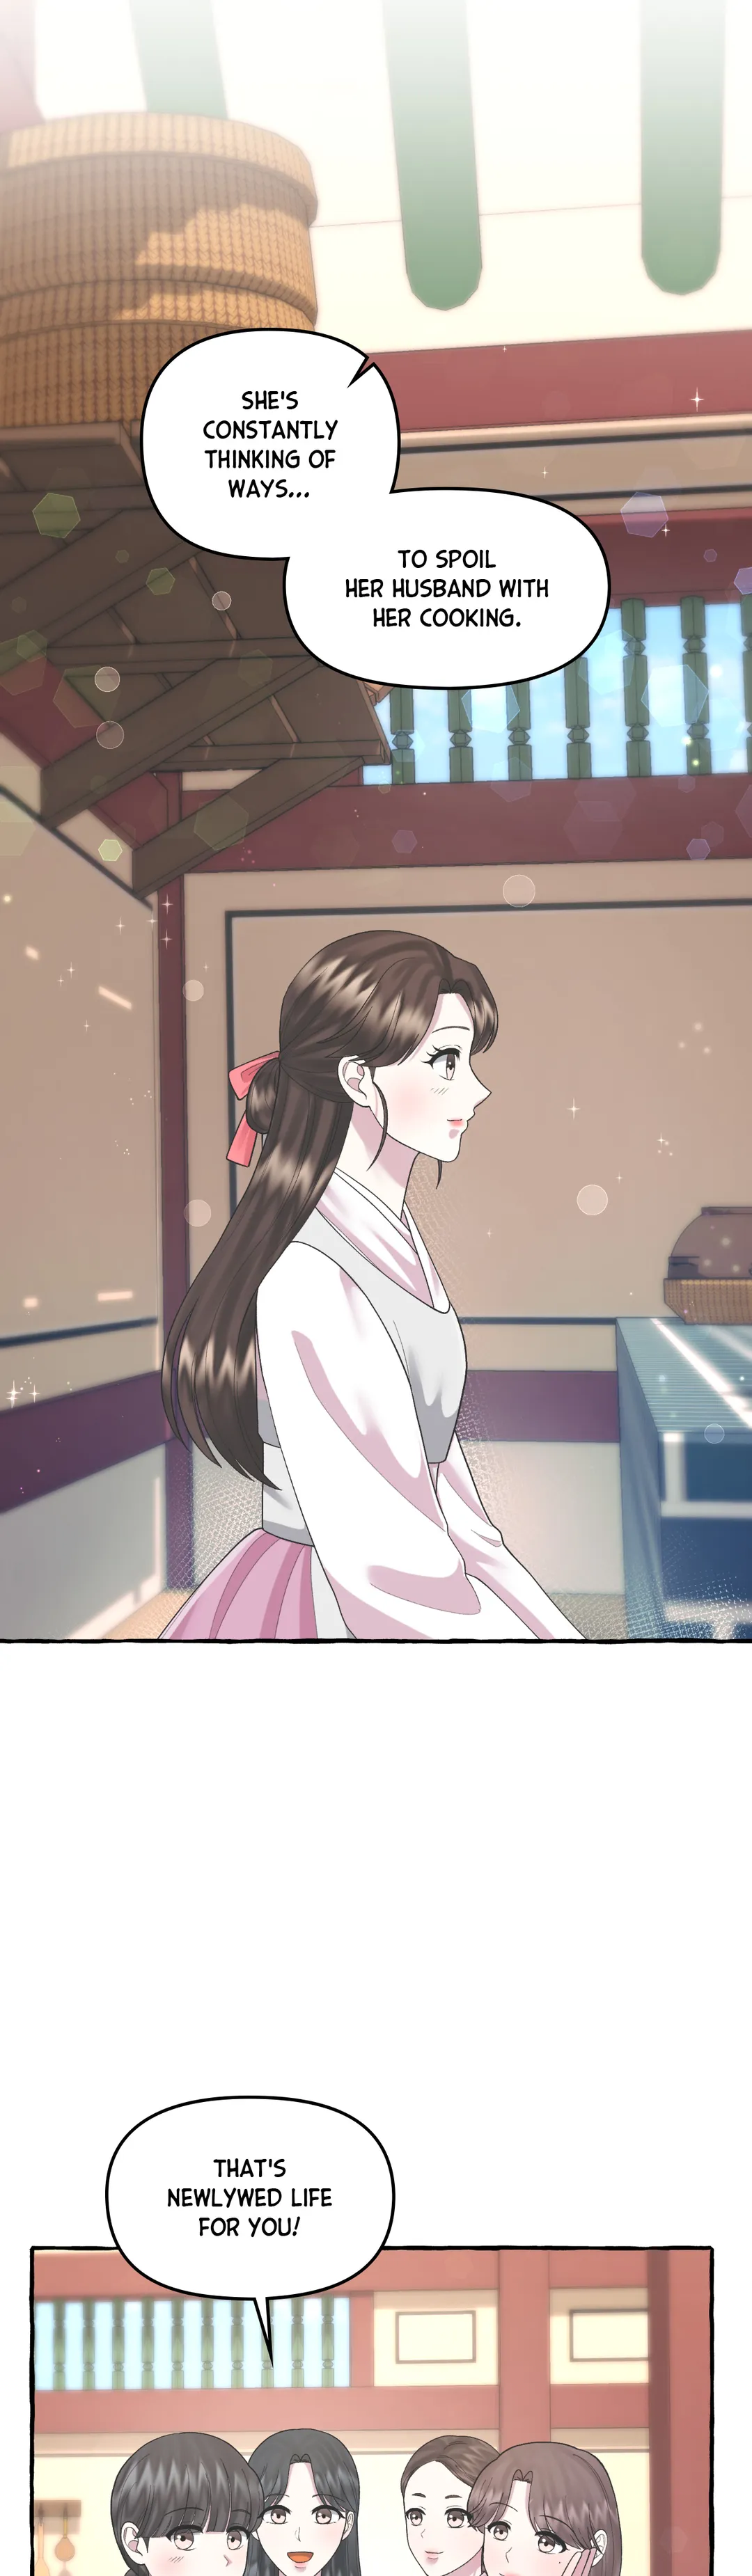 Cheer Up, Your Highness! chapter 45